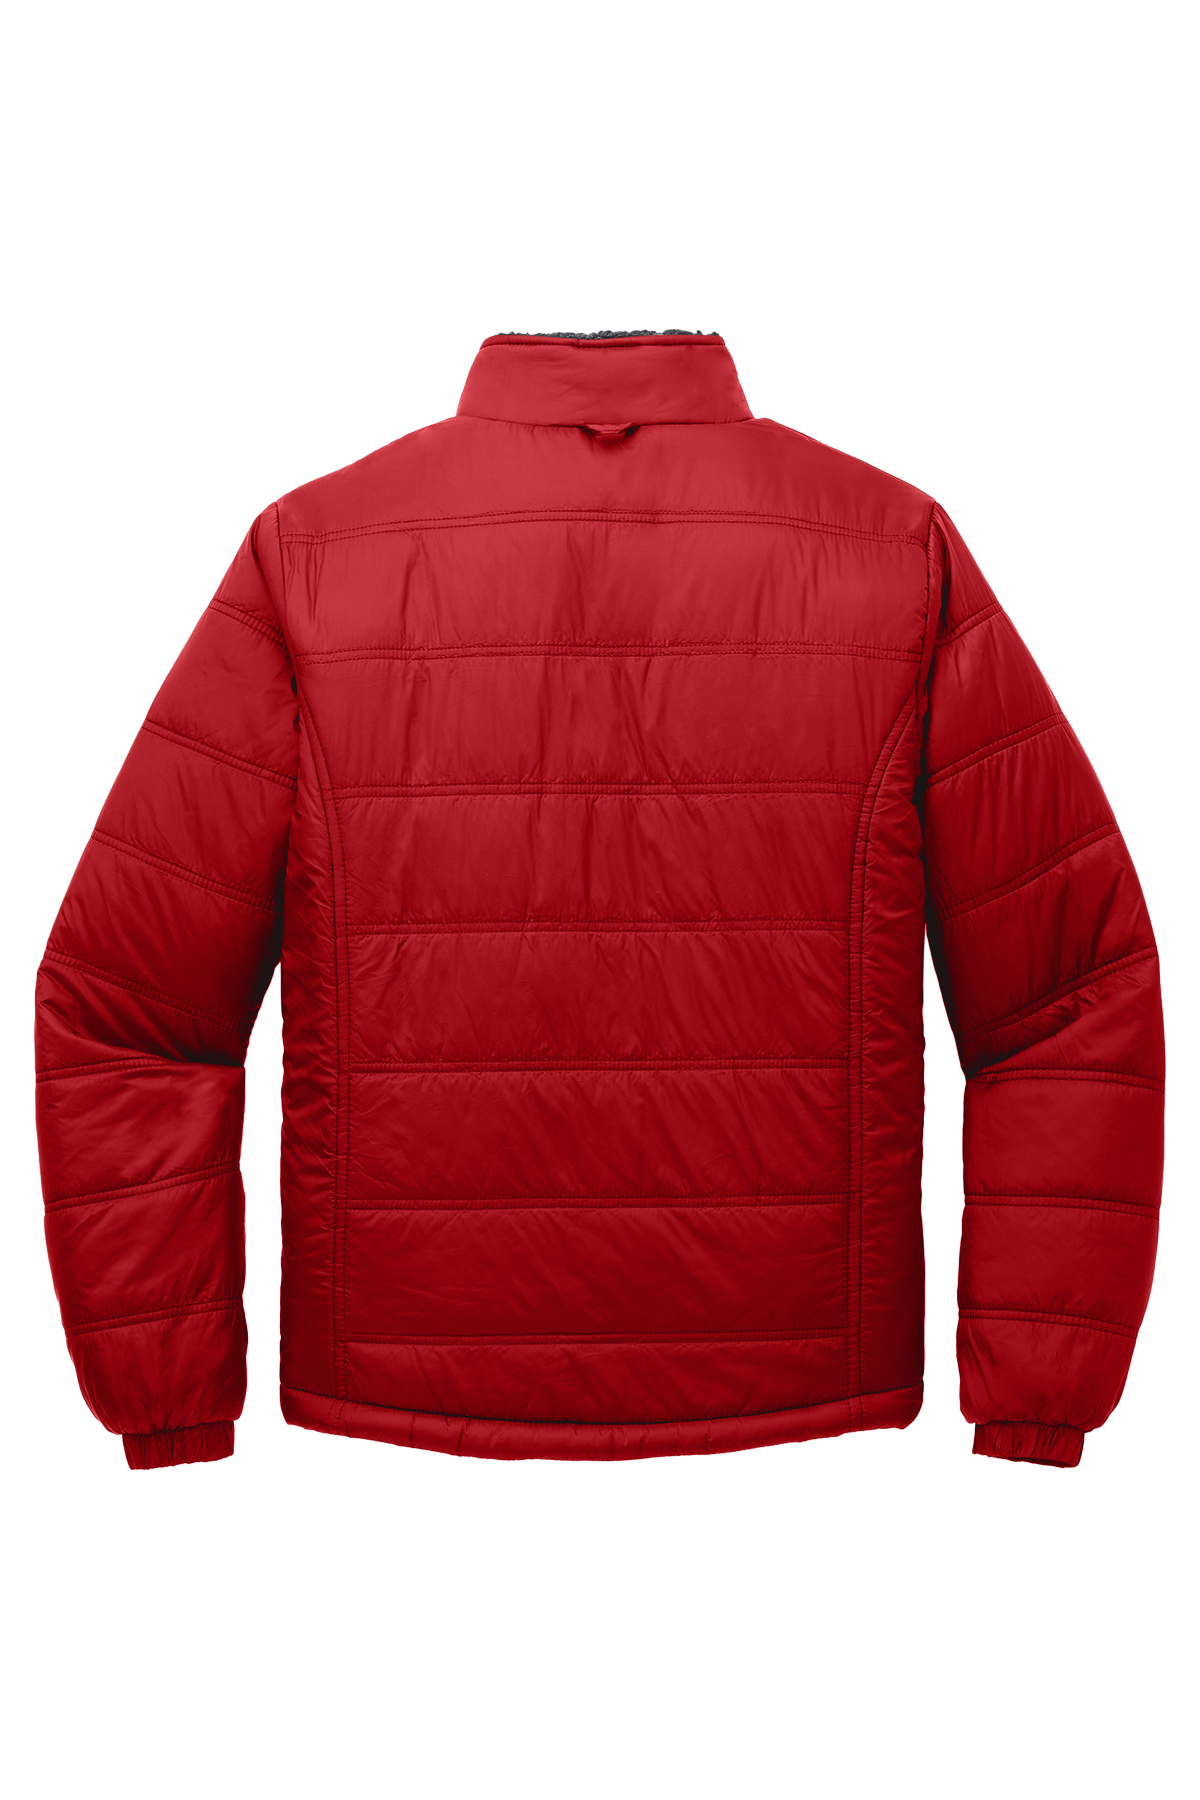 Port Authority Colorblock 3-in-1 Jacket | Product | SanMar